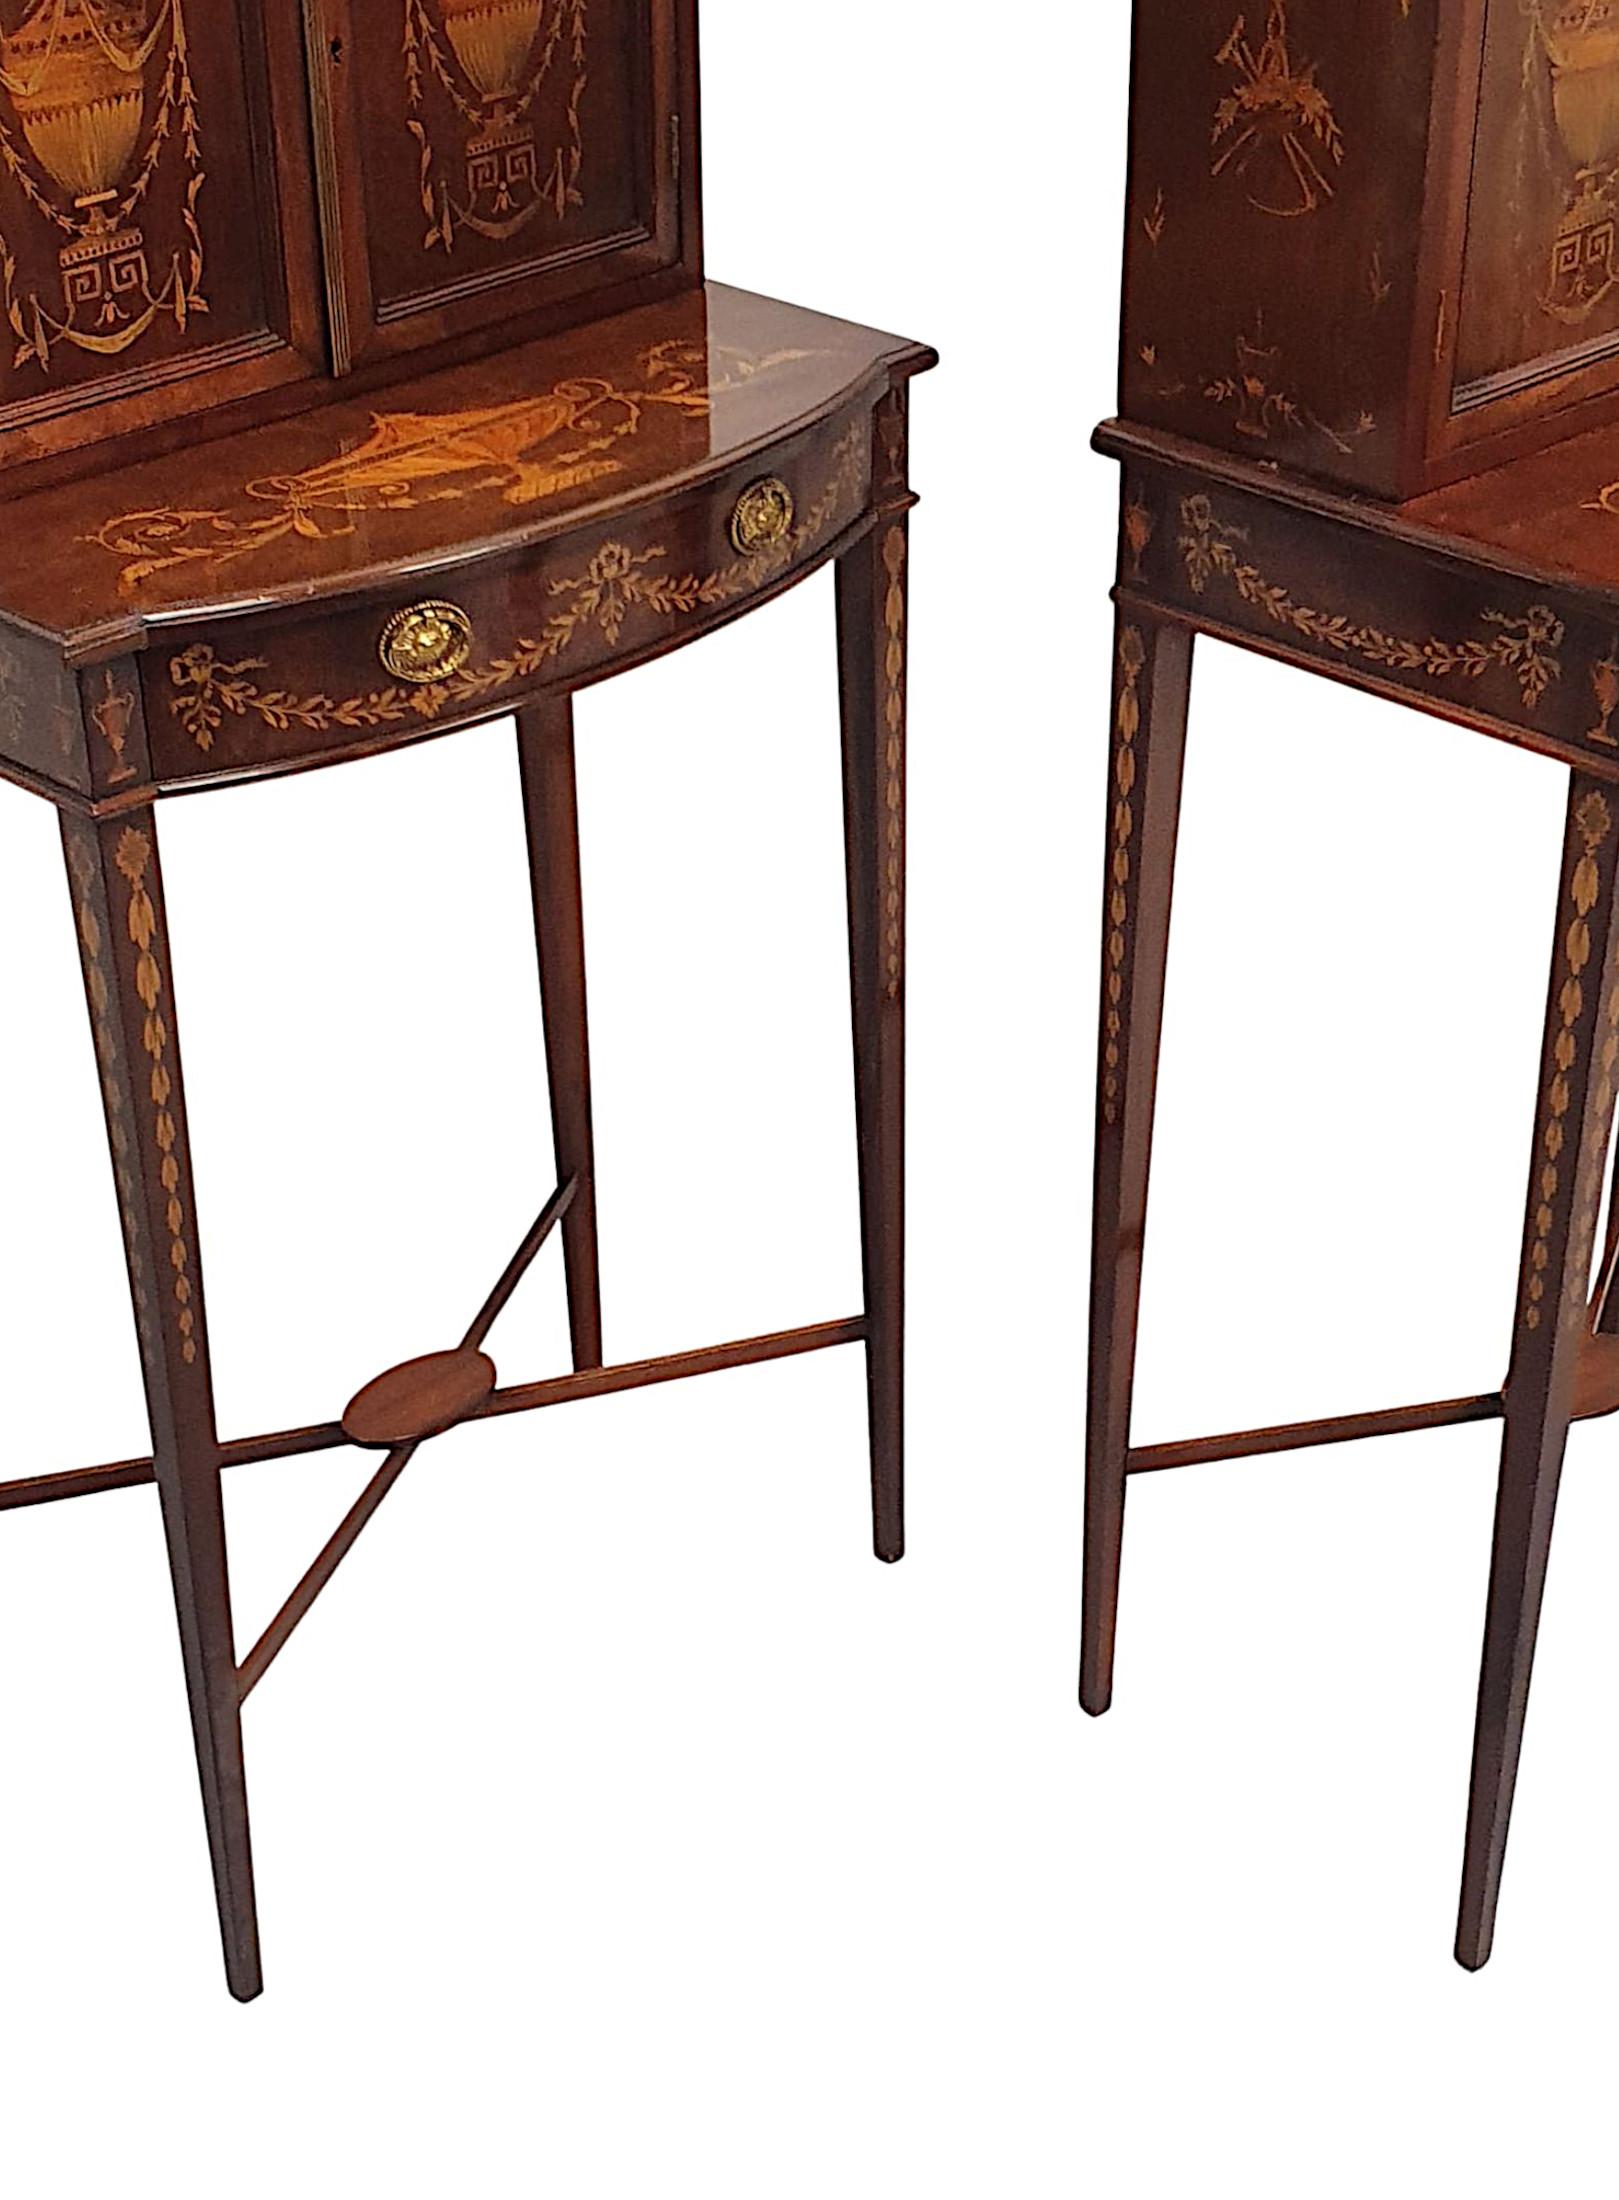  A Rare Pair of Exceptional Edwardian Cabinets Attributed to Edward and Roberts For Sale 3